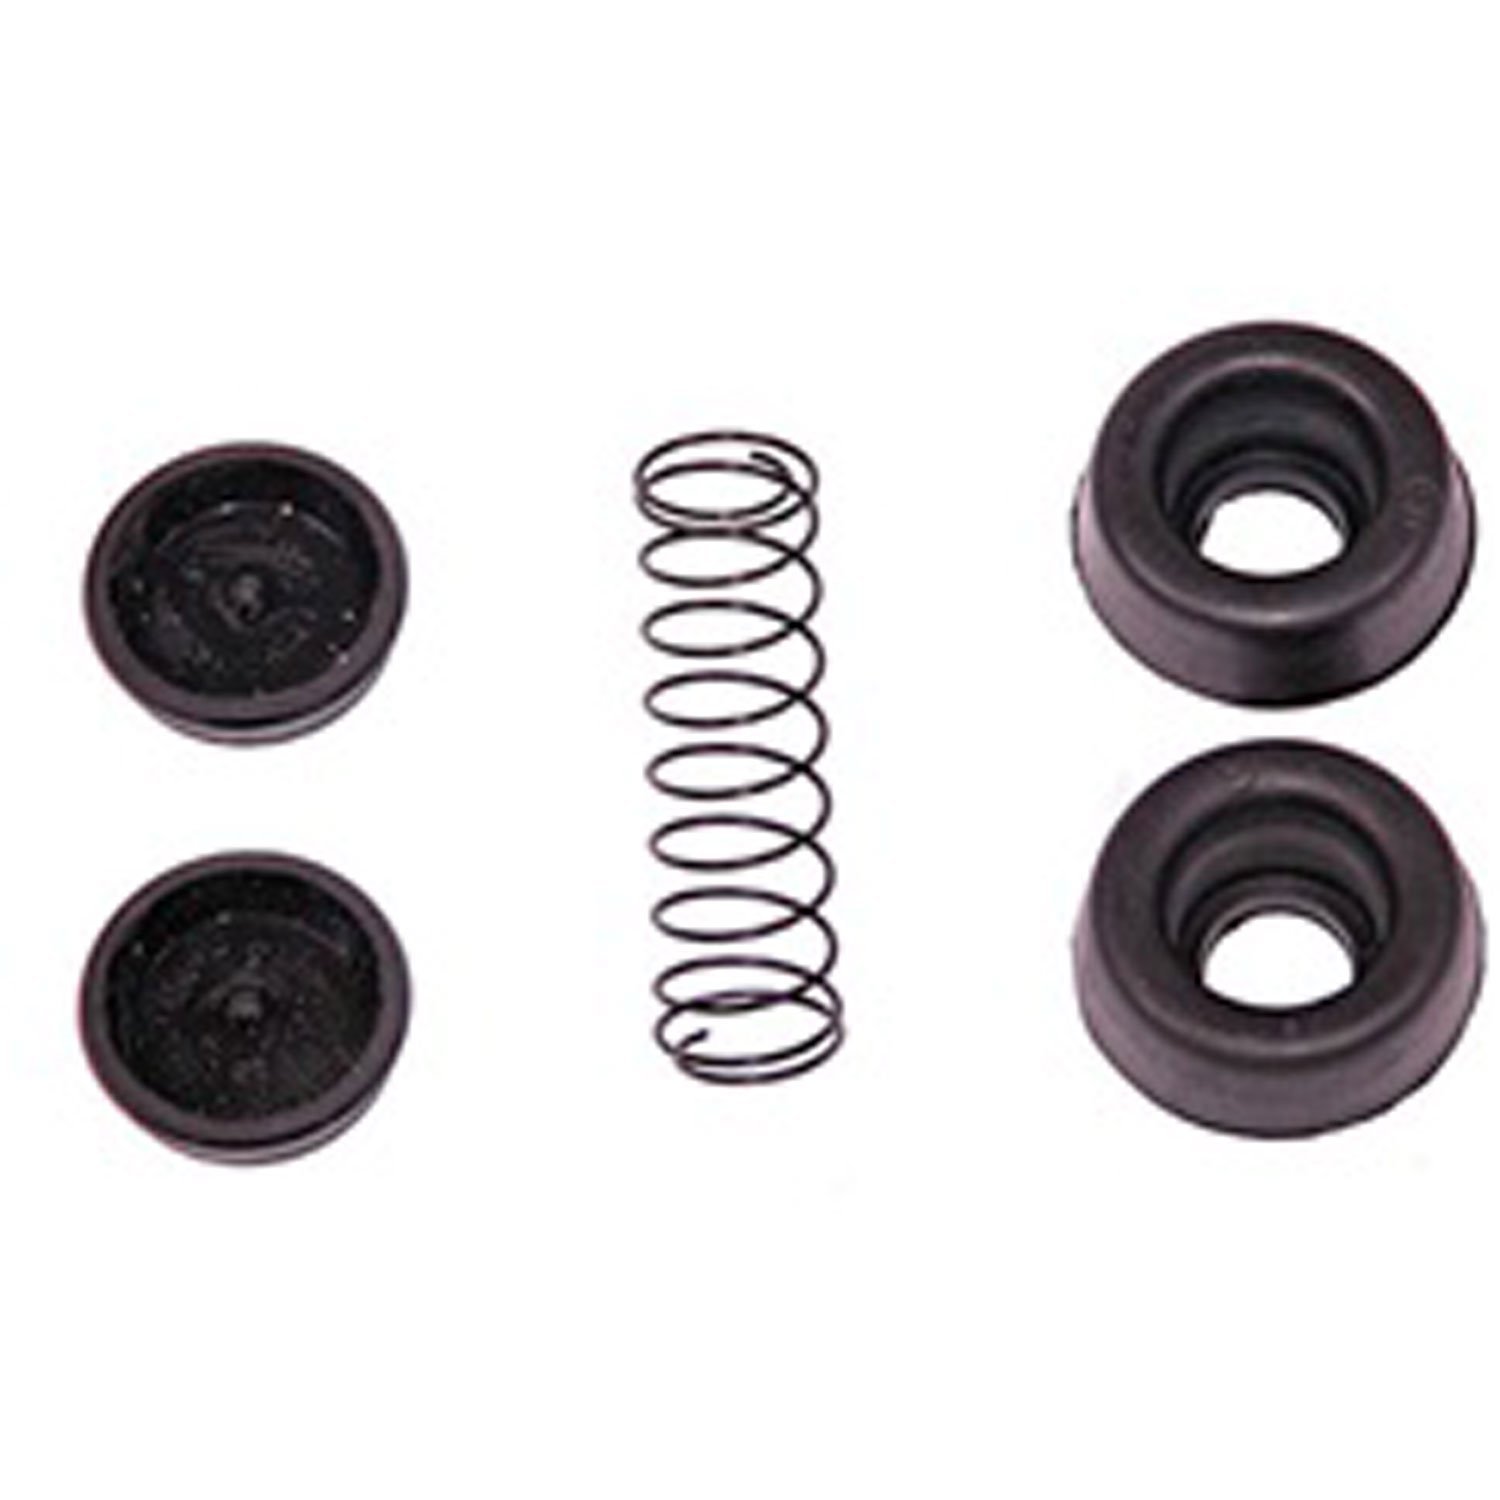 This wheel cylinder repair kit from Omix-ADA allows